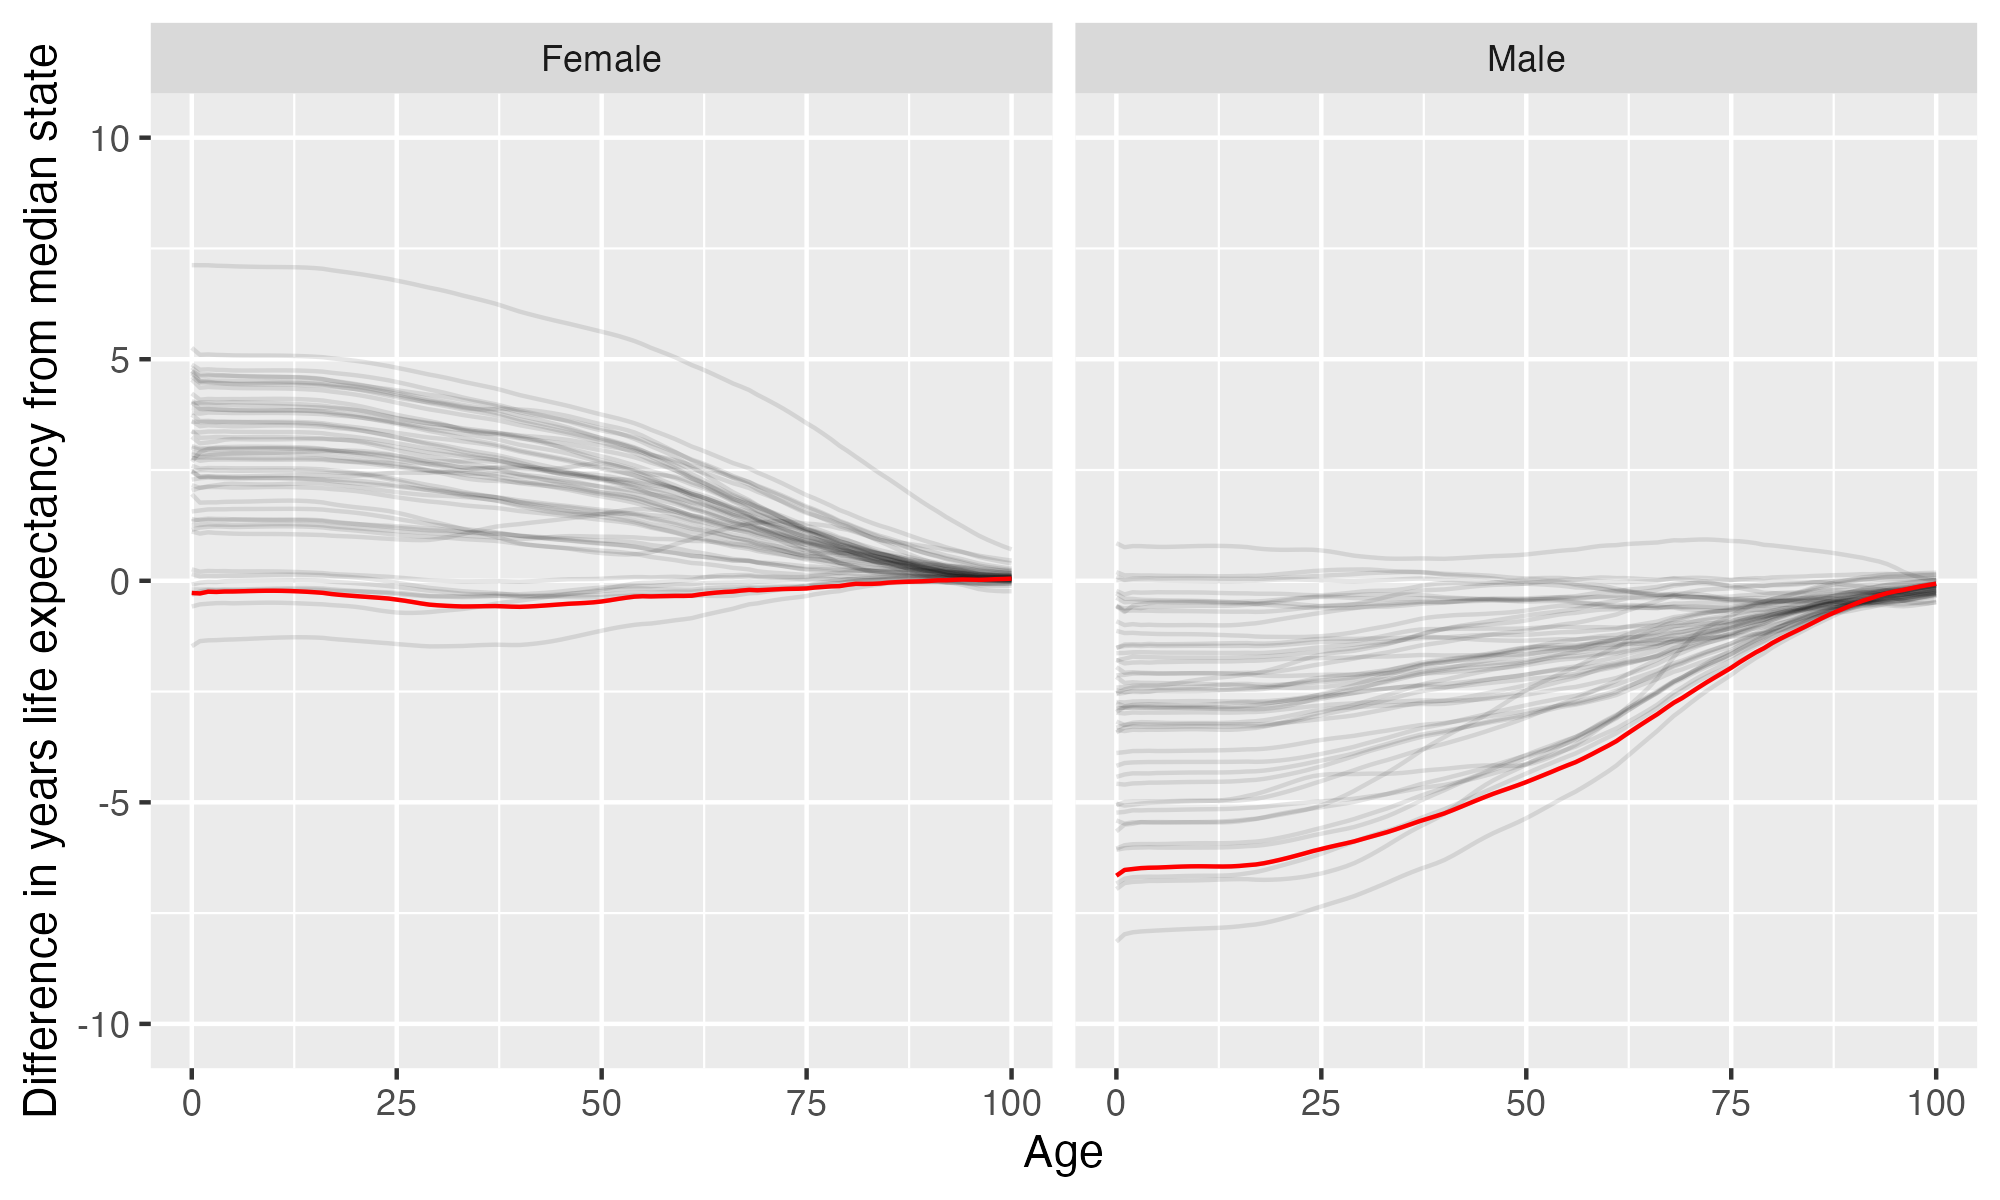 Line plots showing difference in life expectancy for each age for people of this state versus the median state